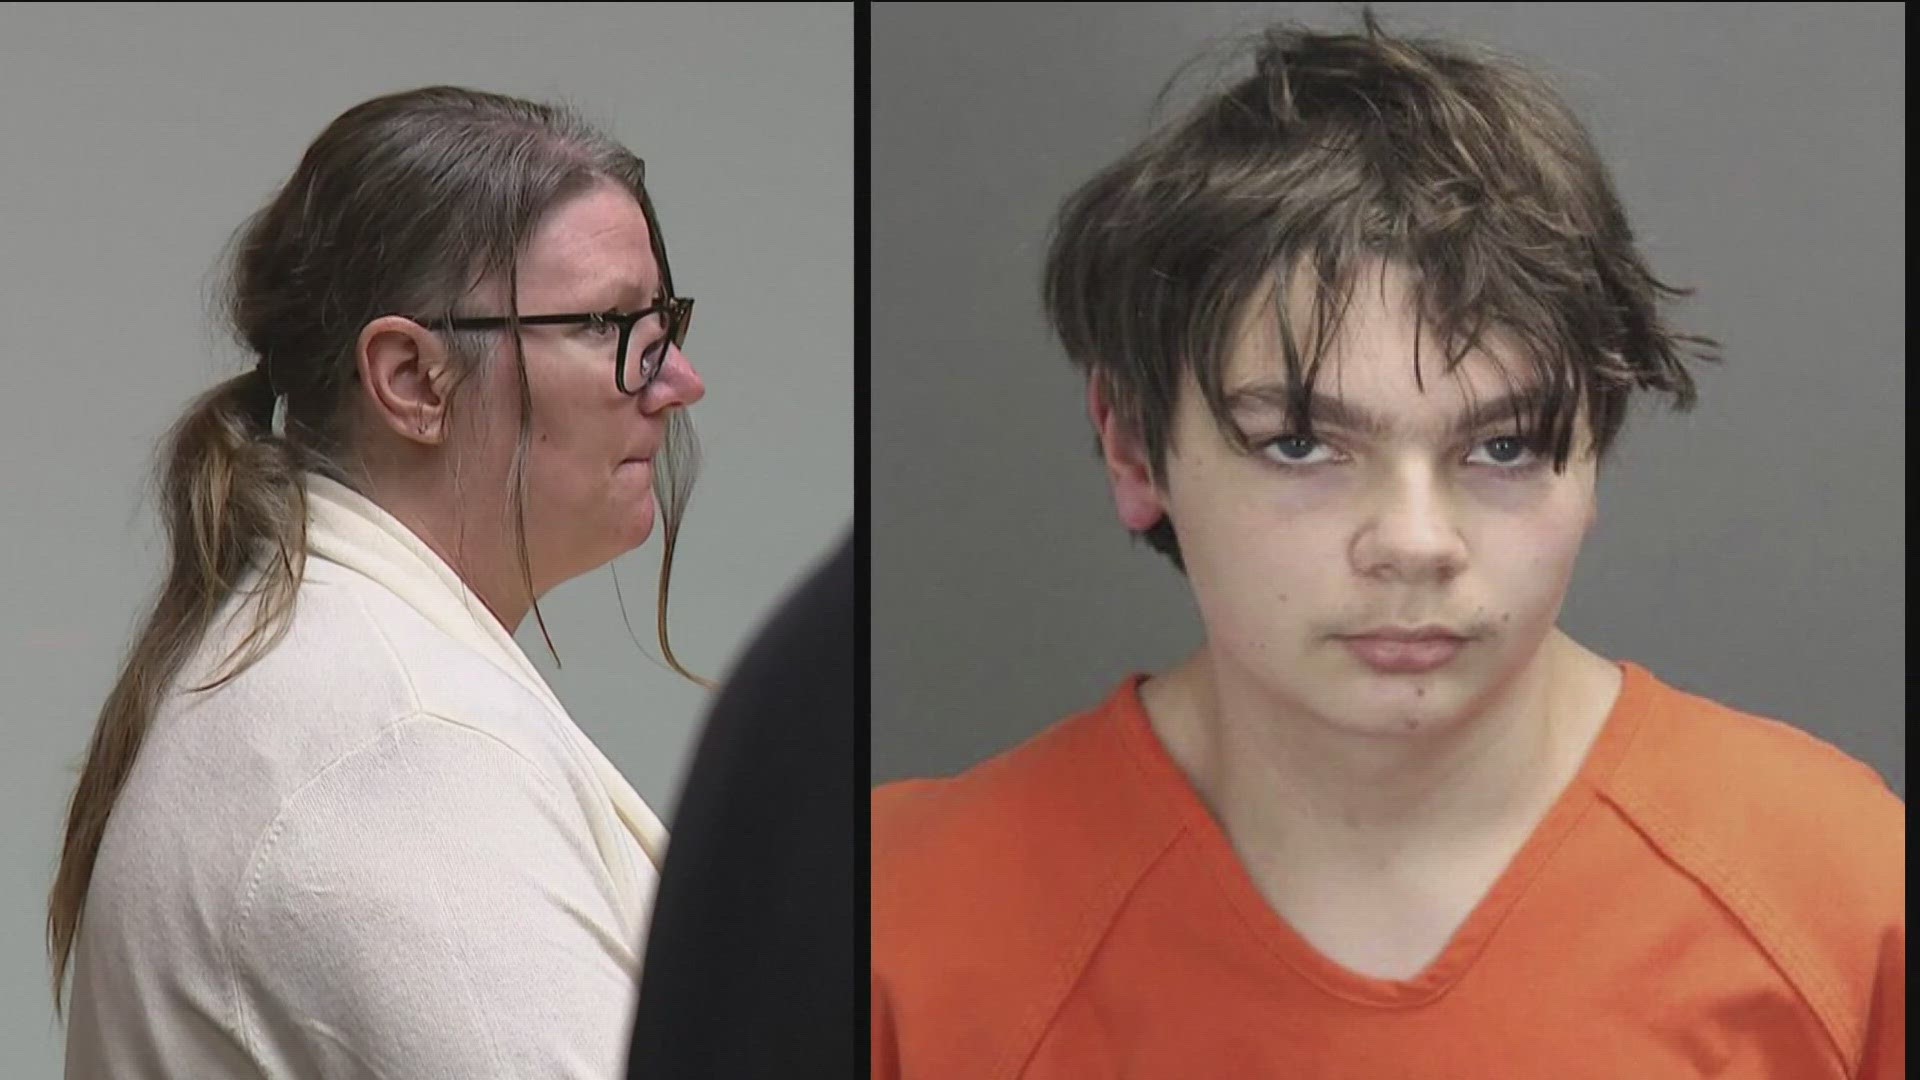 Prosecutors say Jennifer Crumbley had a duty under Michigan law to prevent her son, who was 15 at the time, from harming others.